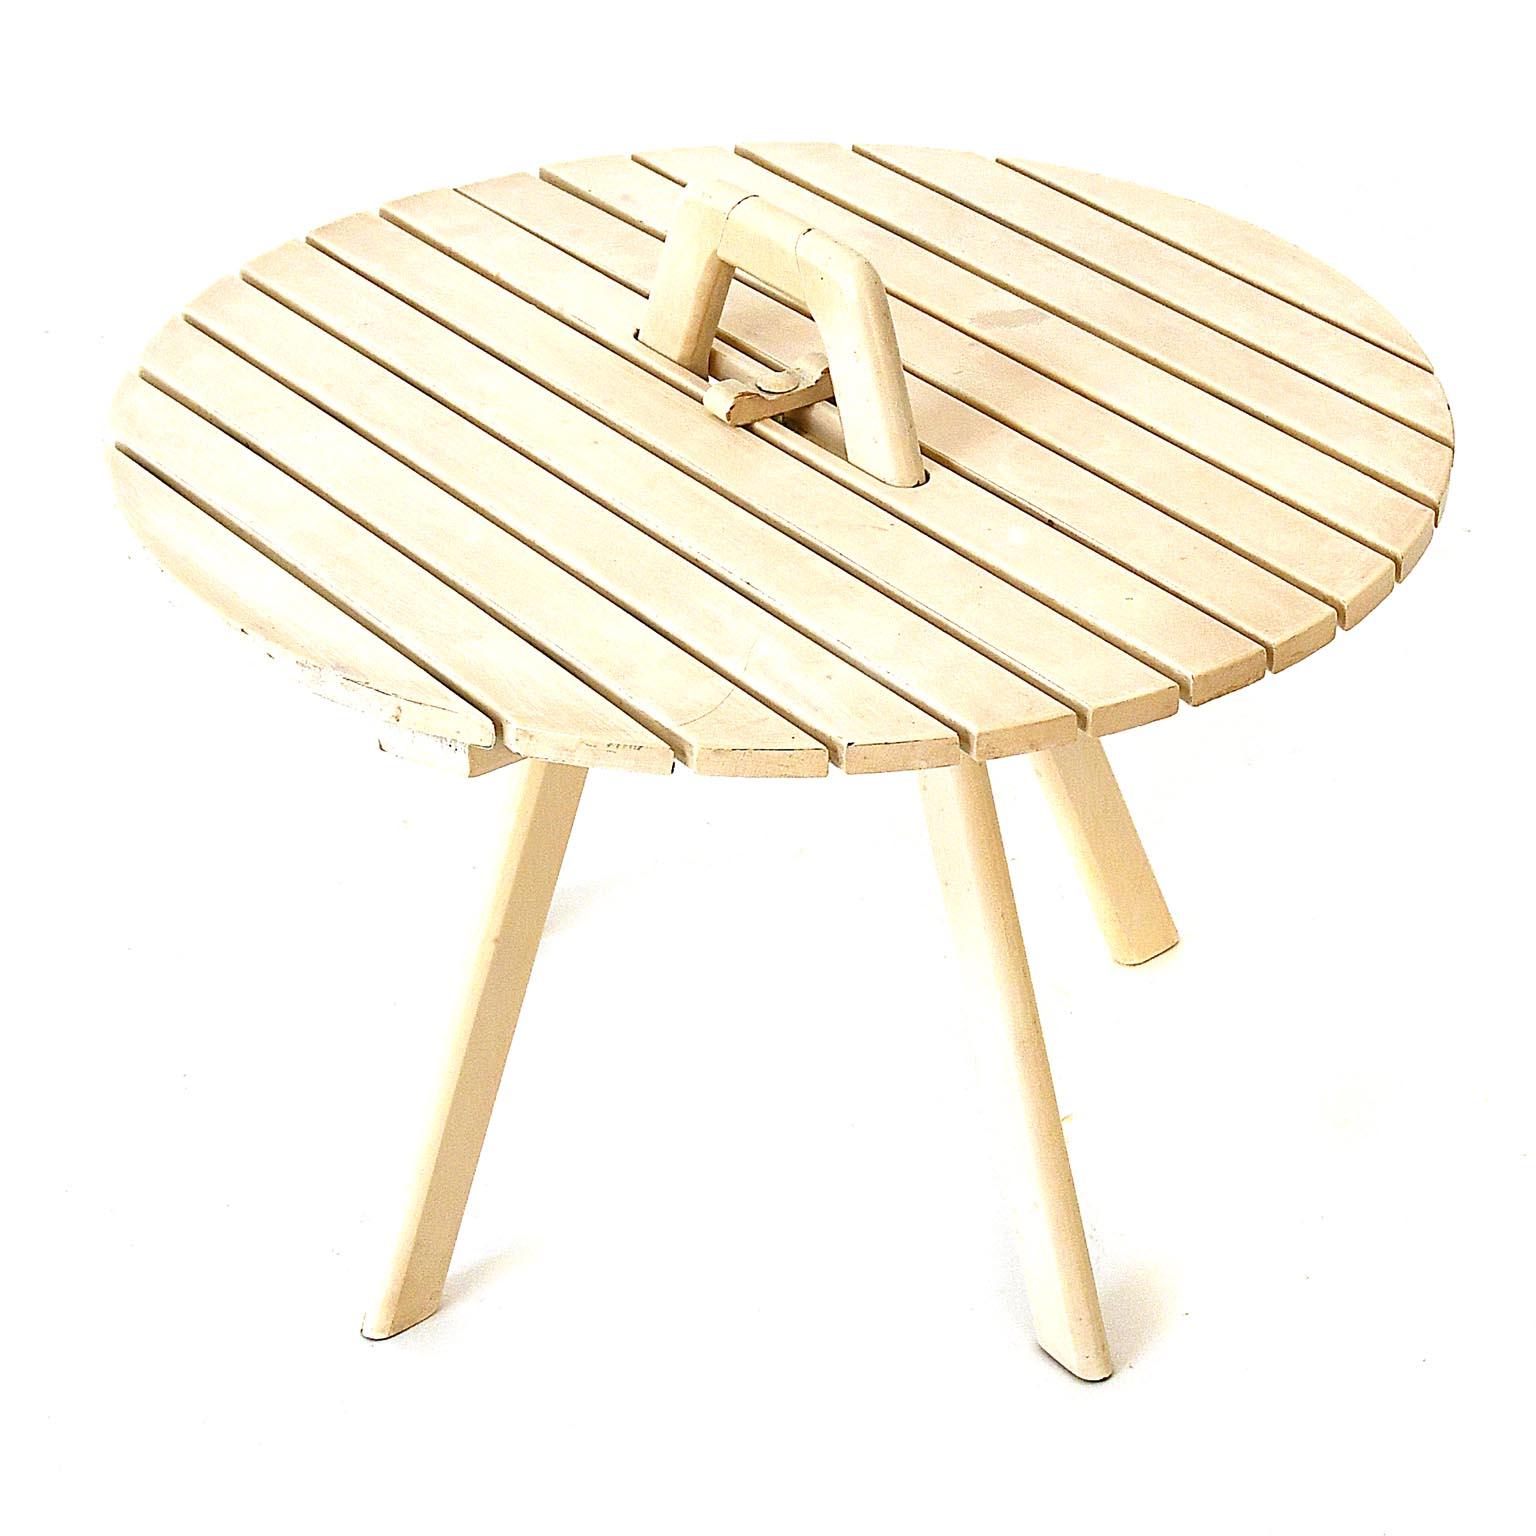 Dismountable table made by Clairitex Paris. The piece is in its original condition, white lacquered, partly the lacquer is slightly rubbed off. The piece can be disassembled. The table top is fixed with a wooden screw in the middle as well as the